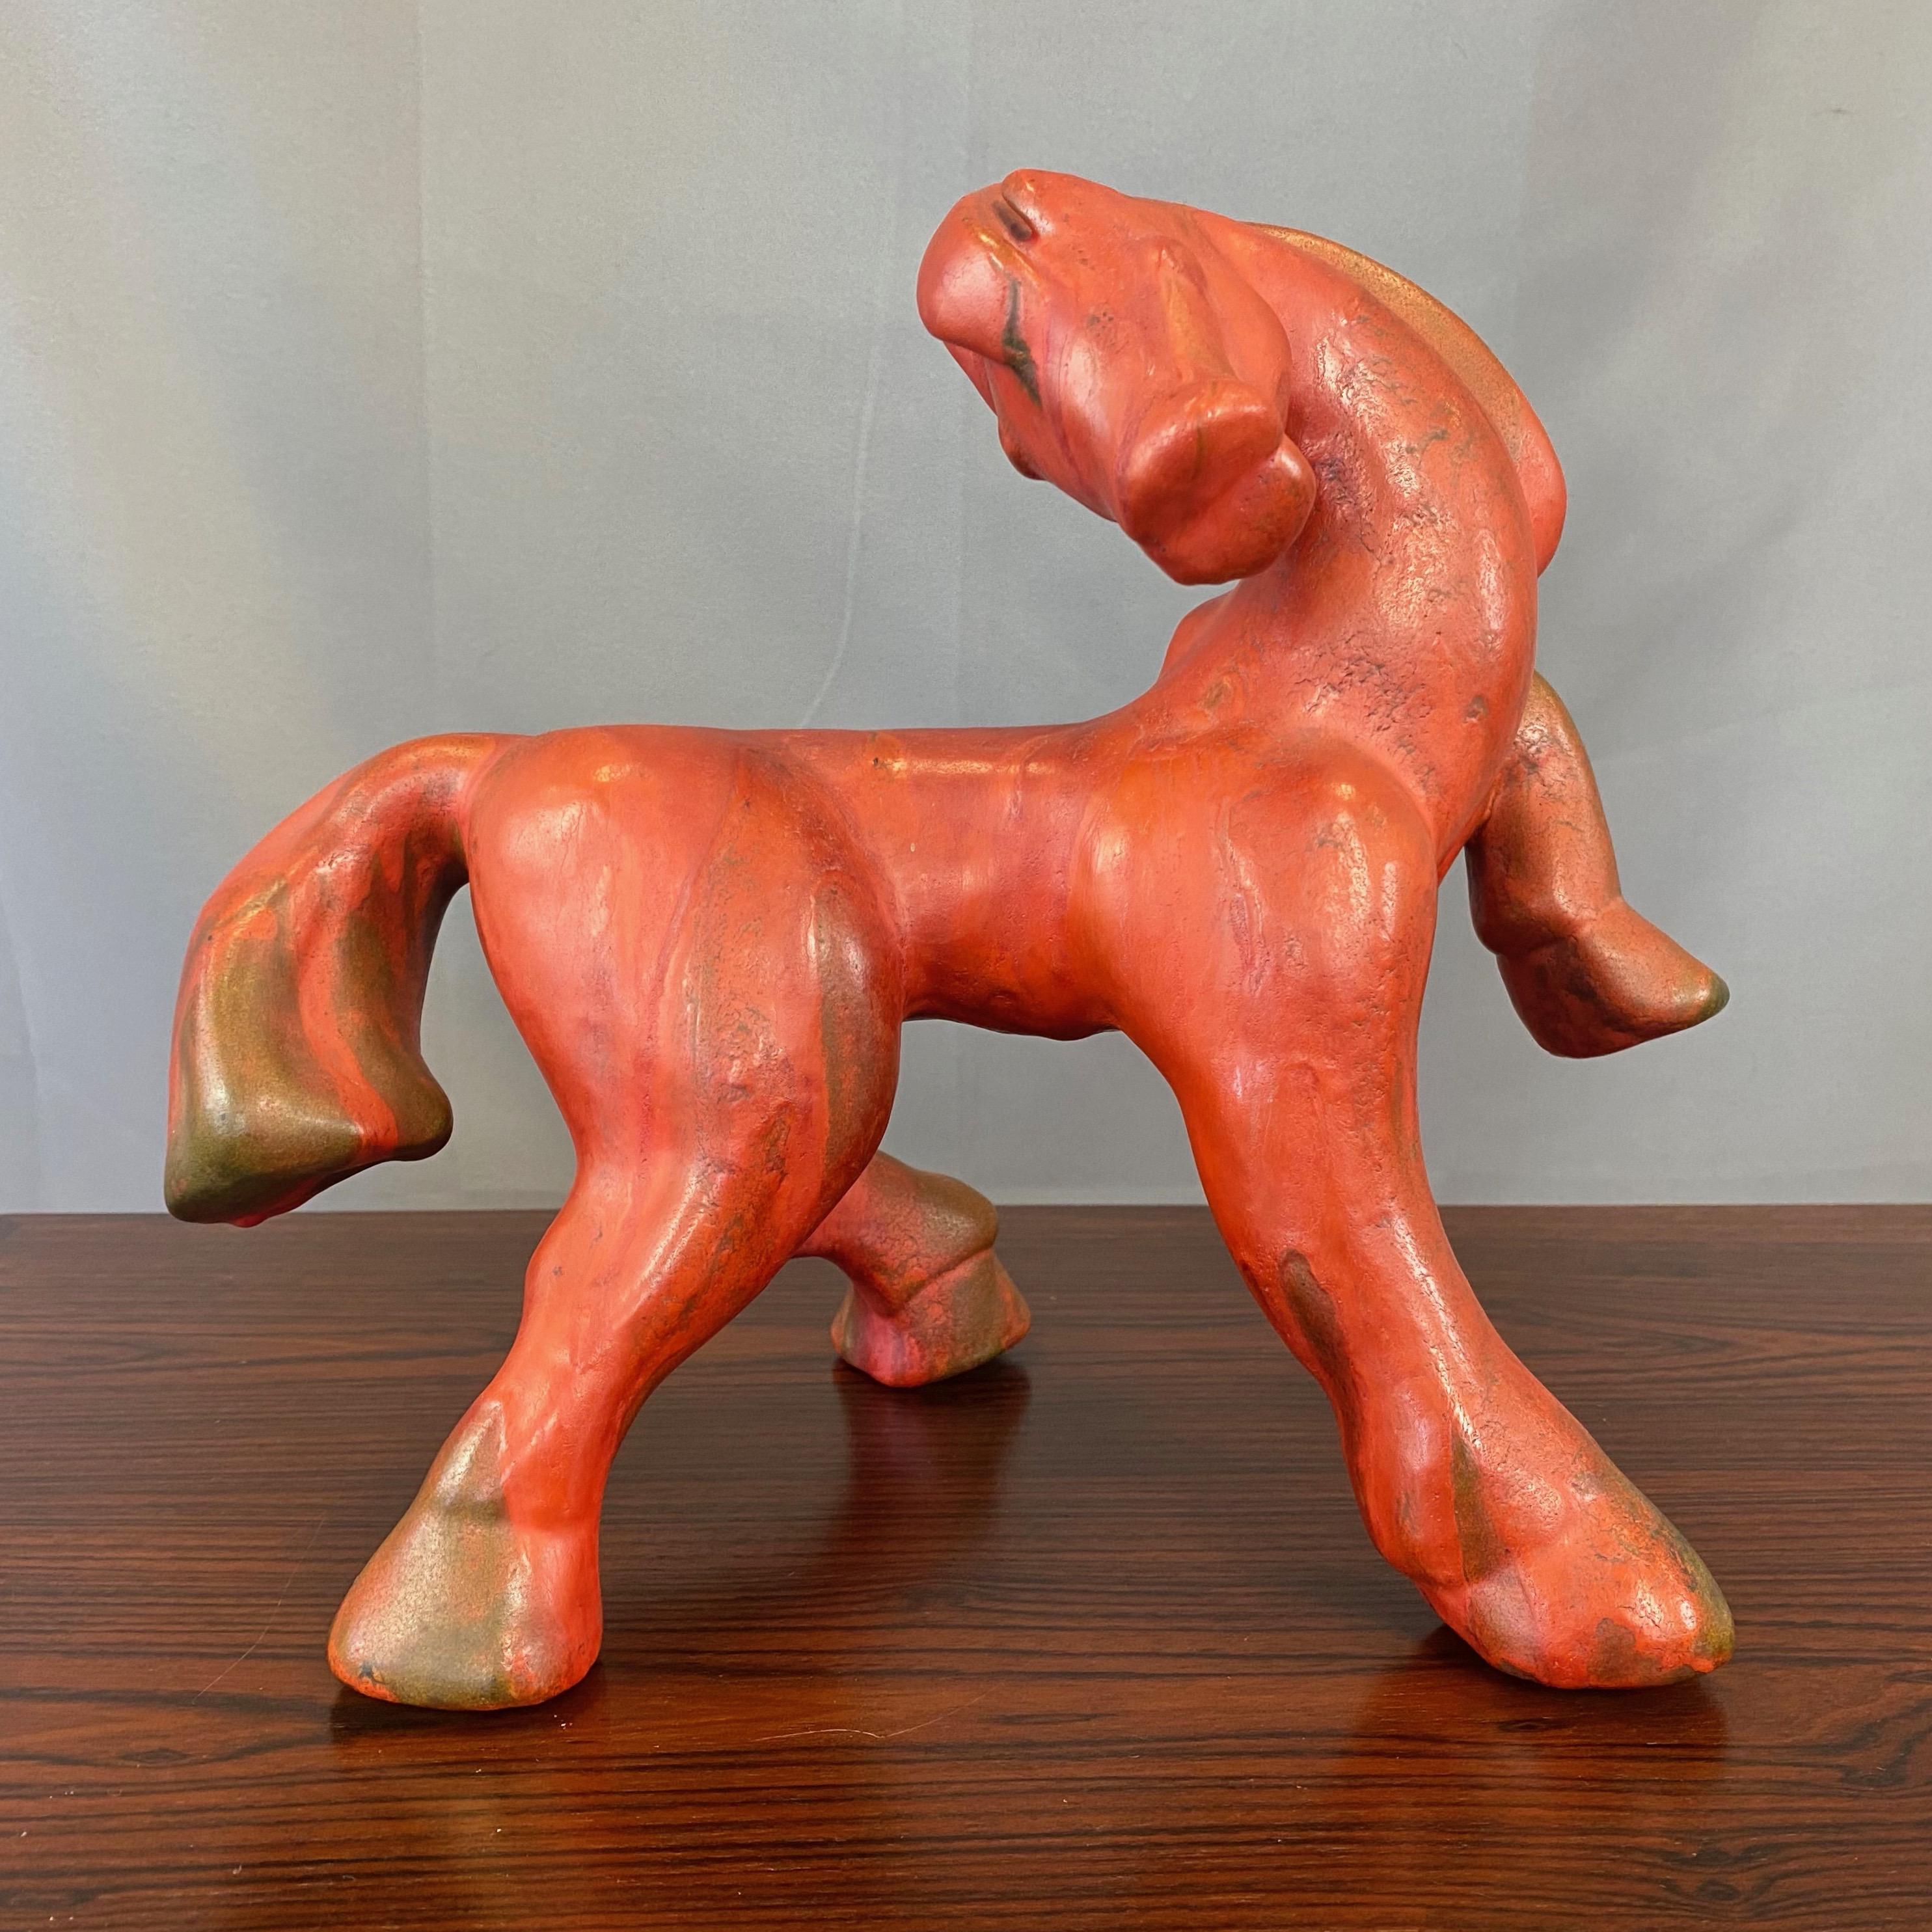 An uncommon 1960s “Vulkano” glazed ceramic horse by Kurt Tschörner for notable West German pottery studio Ruscha Keramik.

Very lively stylized sculpture of a horse with head thrown back and left leg raised displays strikingly powerful elegance